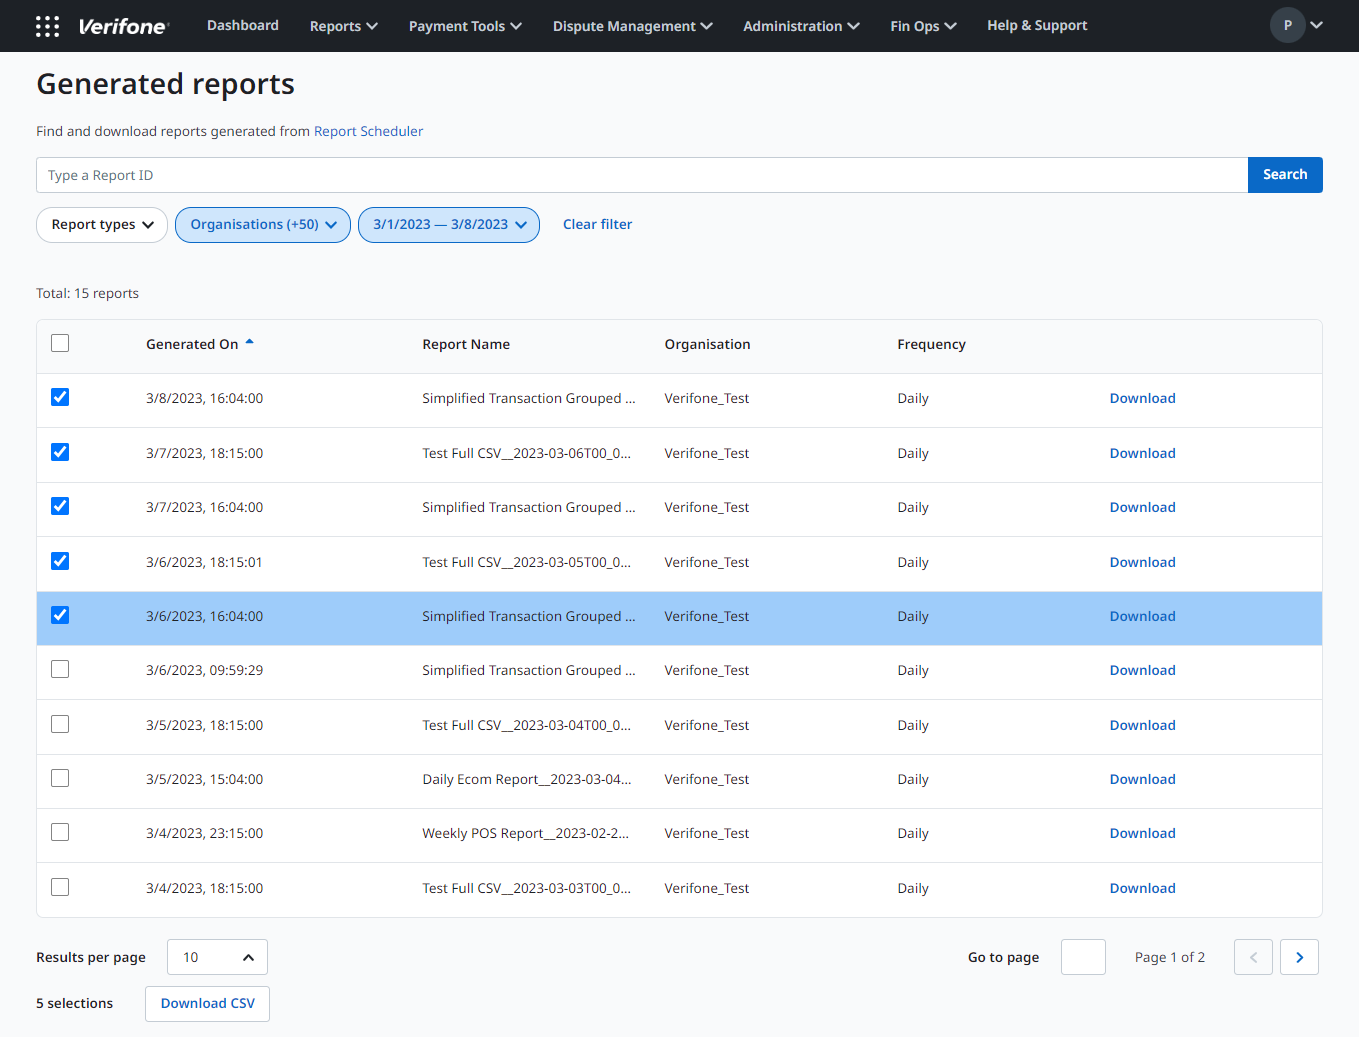 Select Multiple Reports